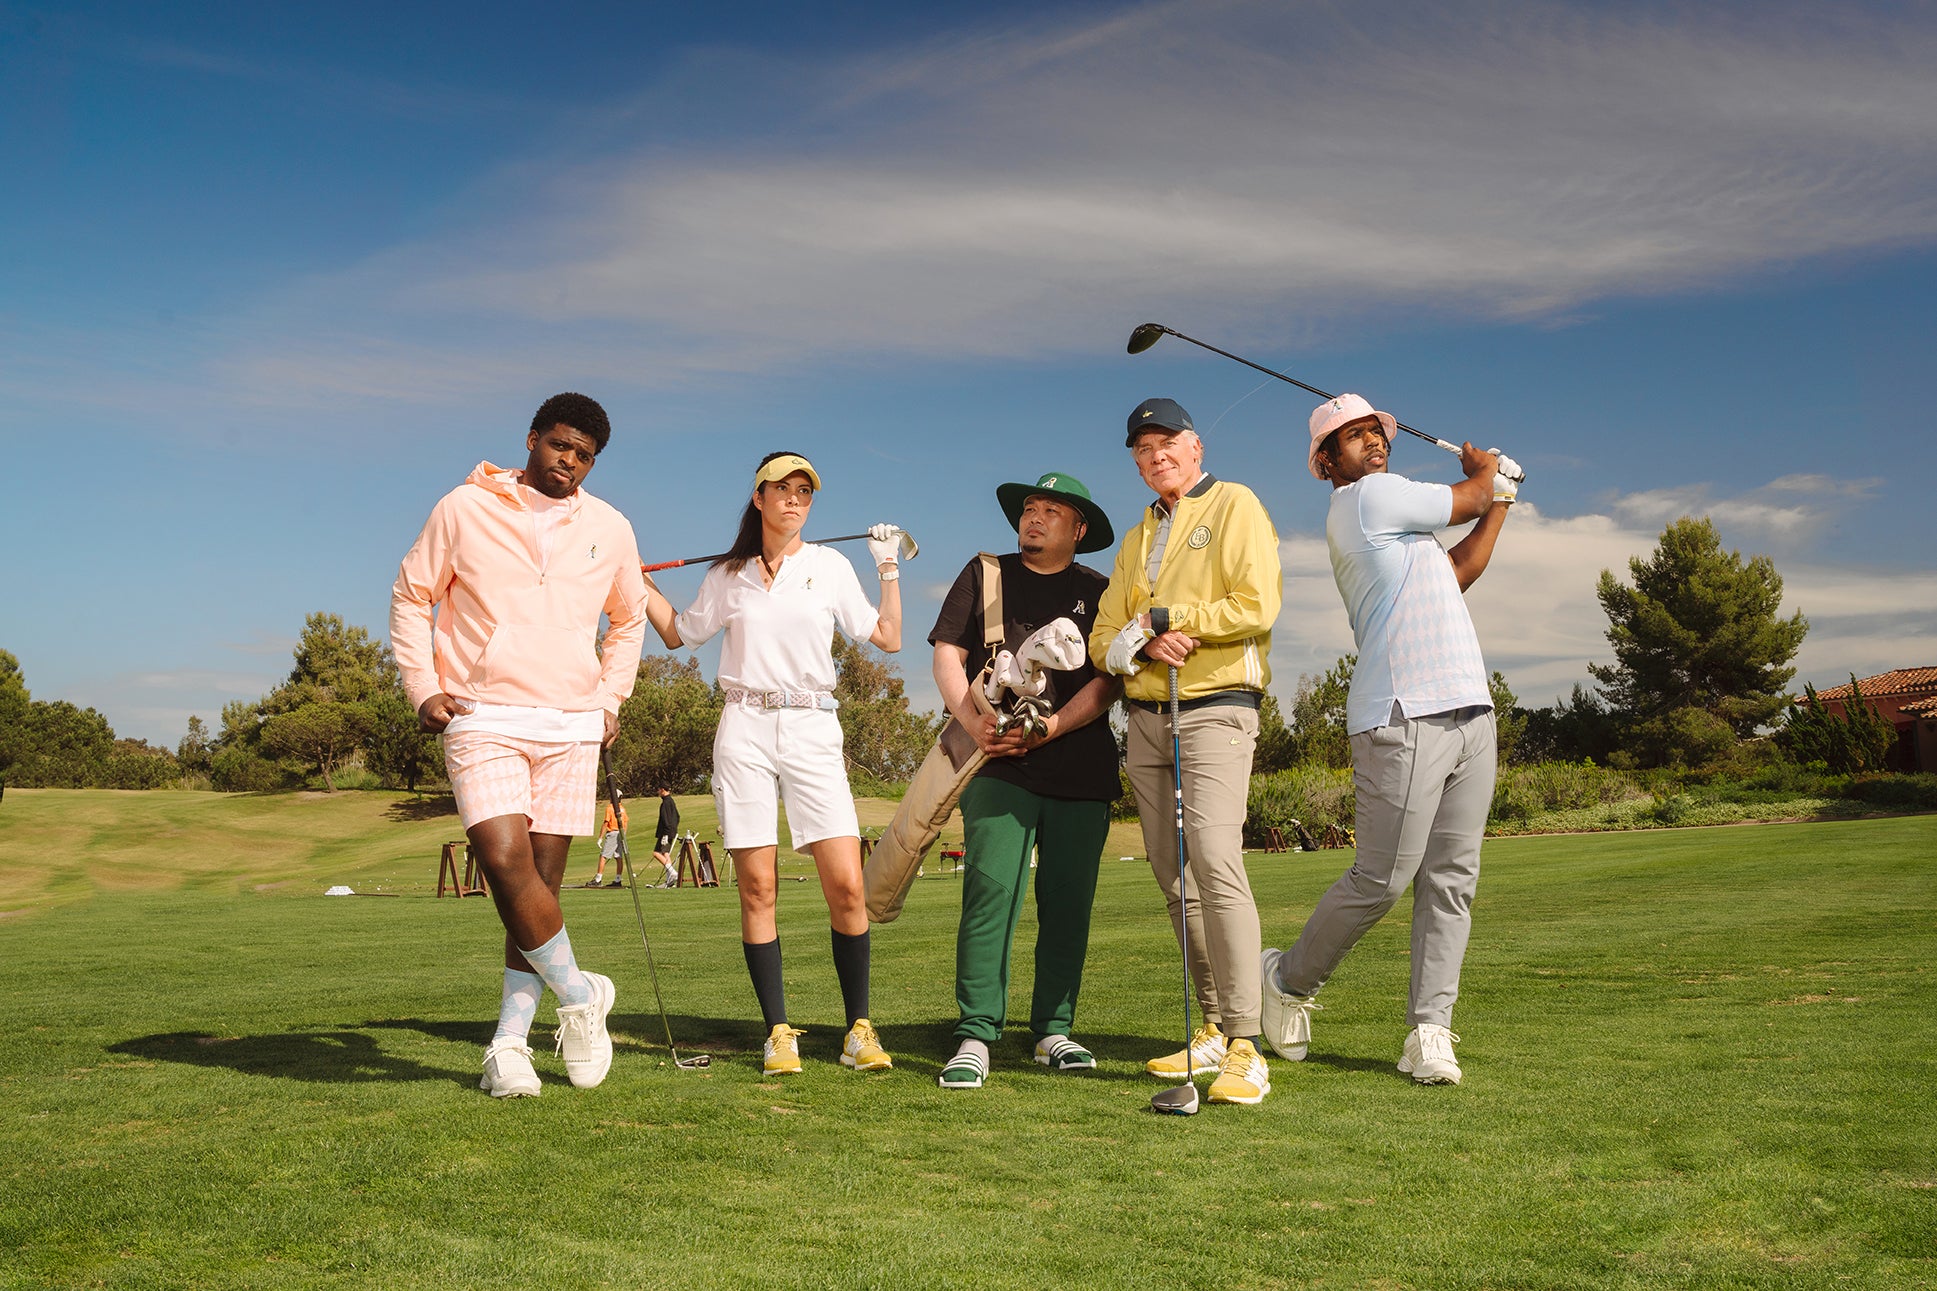 Extra Butter x adidas Golf x Happy Gilmore 25th Anniversary Collection - Featuring Phat Scooters, Seamus Golf, Vice Golf and Asher Golf article image